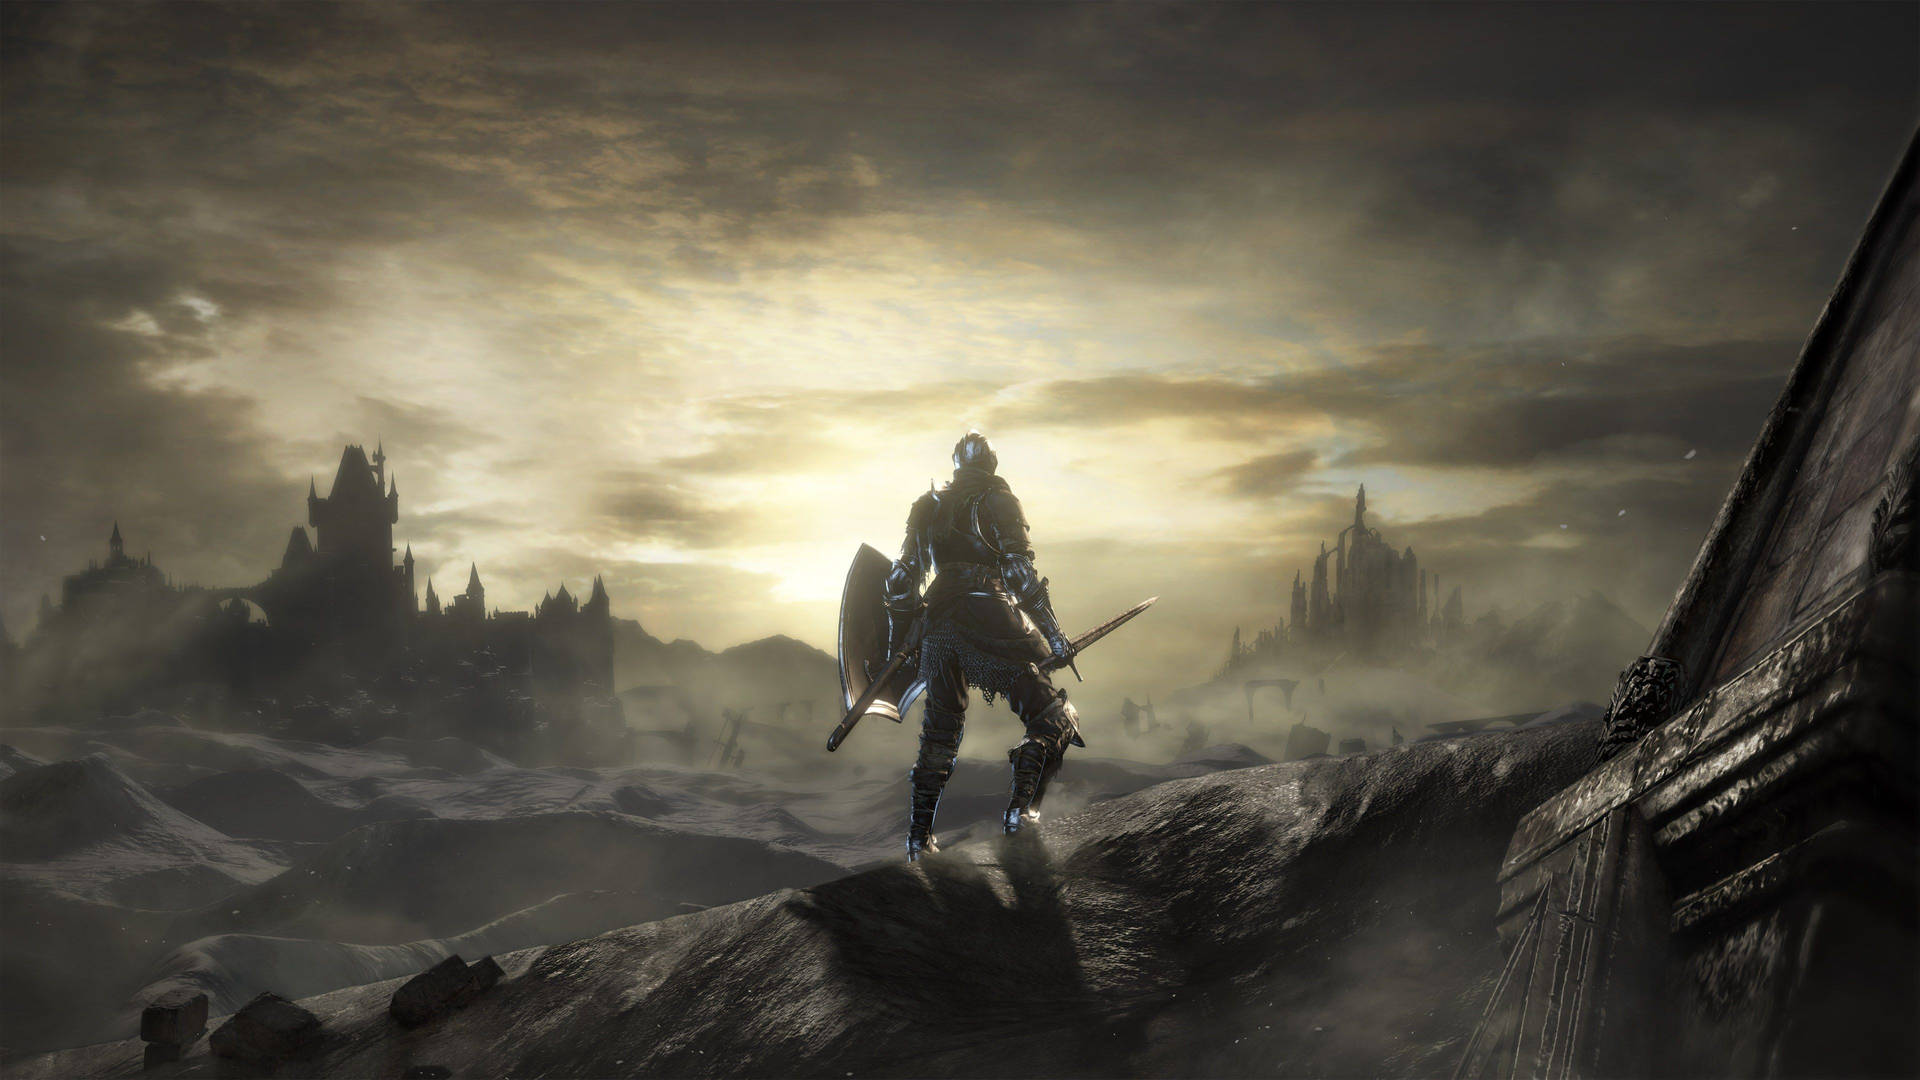 "The Ashen Knight rises to take on the horrors of Dark Souls 3" Wallpaper